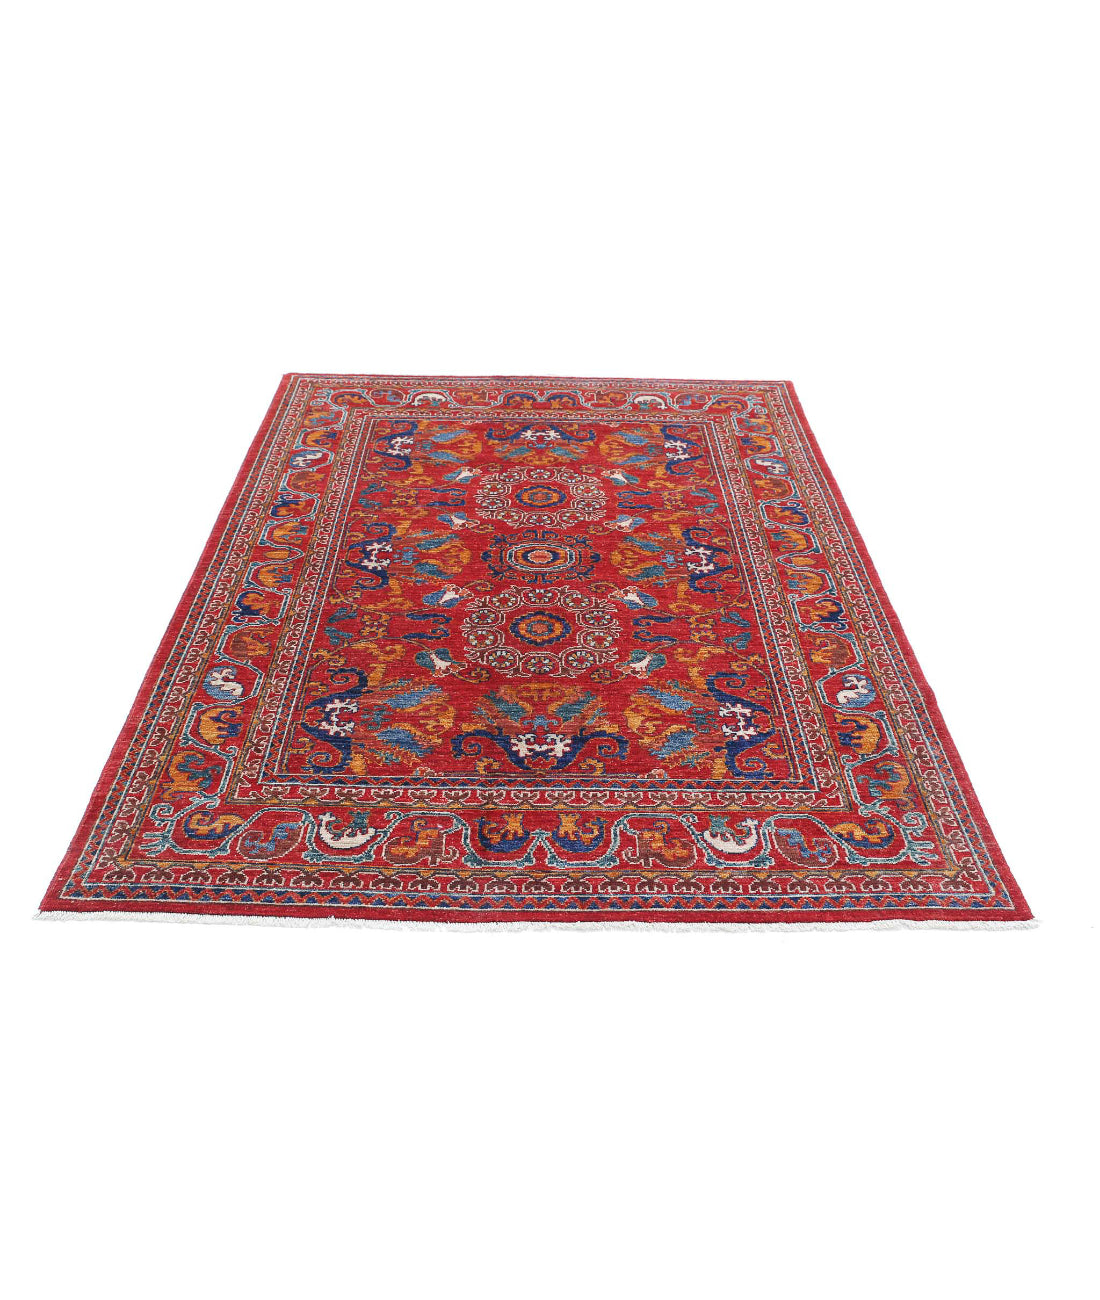 Hand Knotted Nomadic Caucasian Humna Wool Rug - 5'0'' x 7'1'' 5'0'' x 7'1'' (150 X 213) / Red / Gold